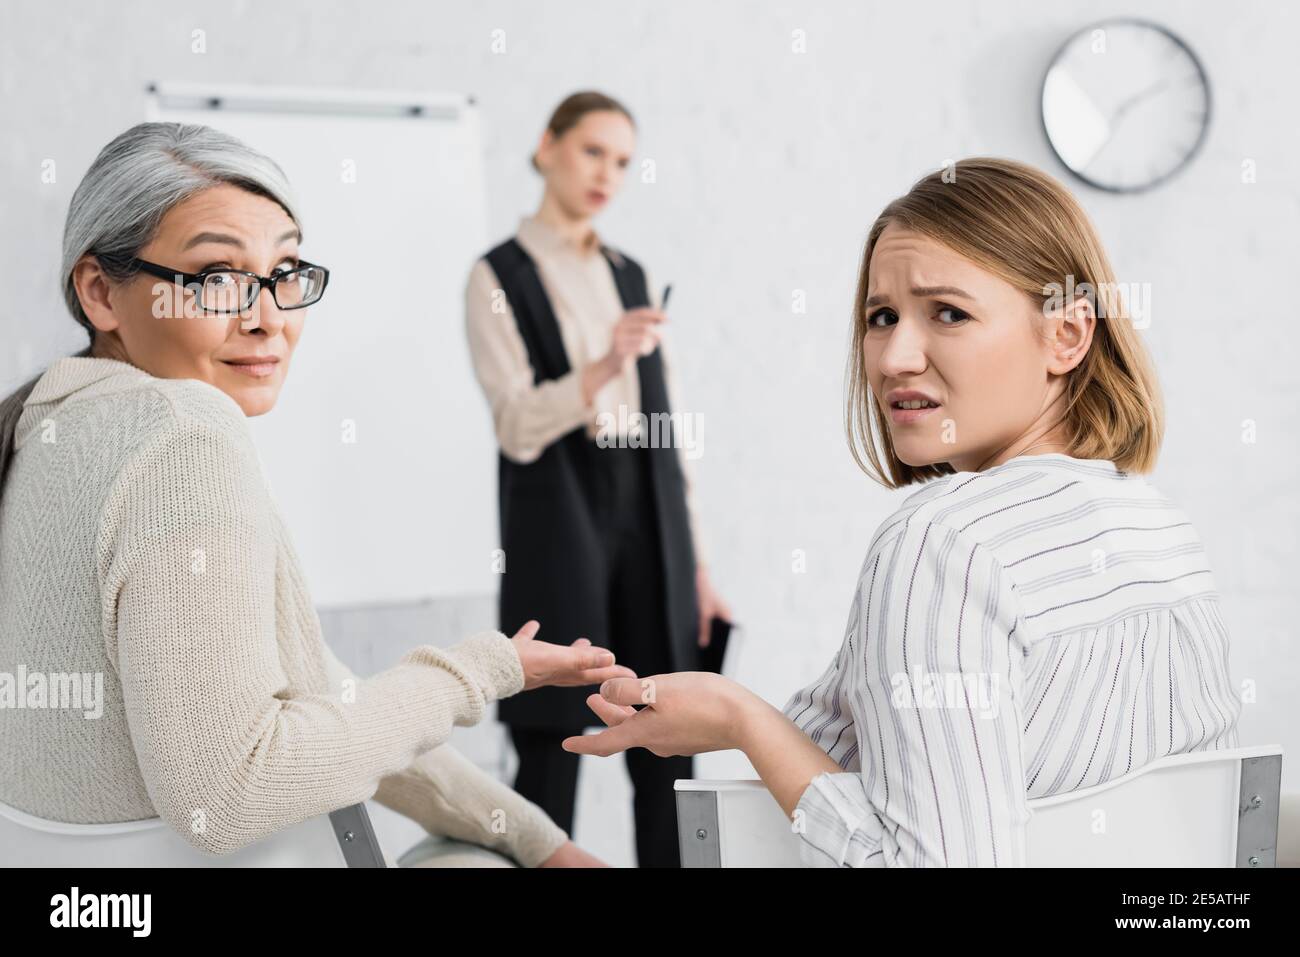 skeptical multicultural businesswomen gesturing while looking at camera during lecture Stock Photo